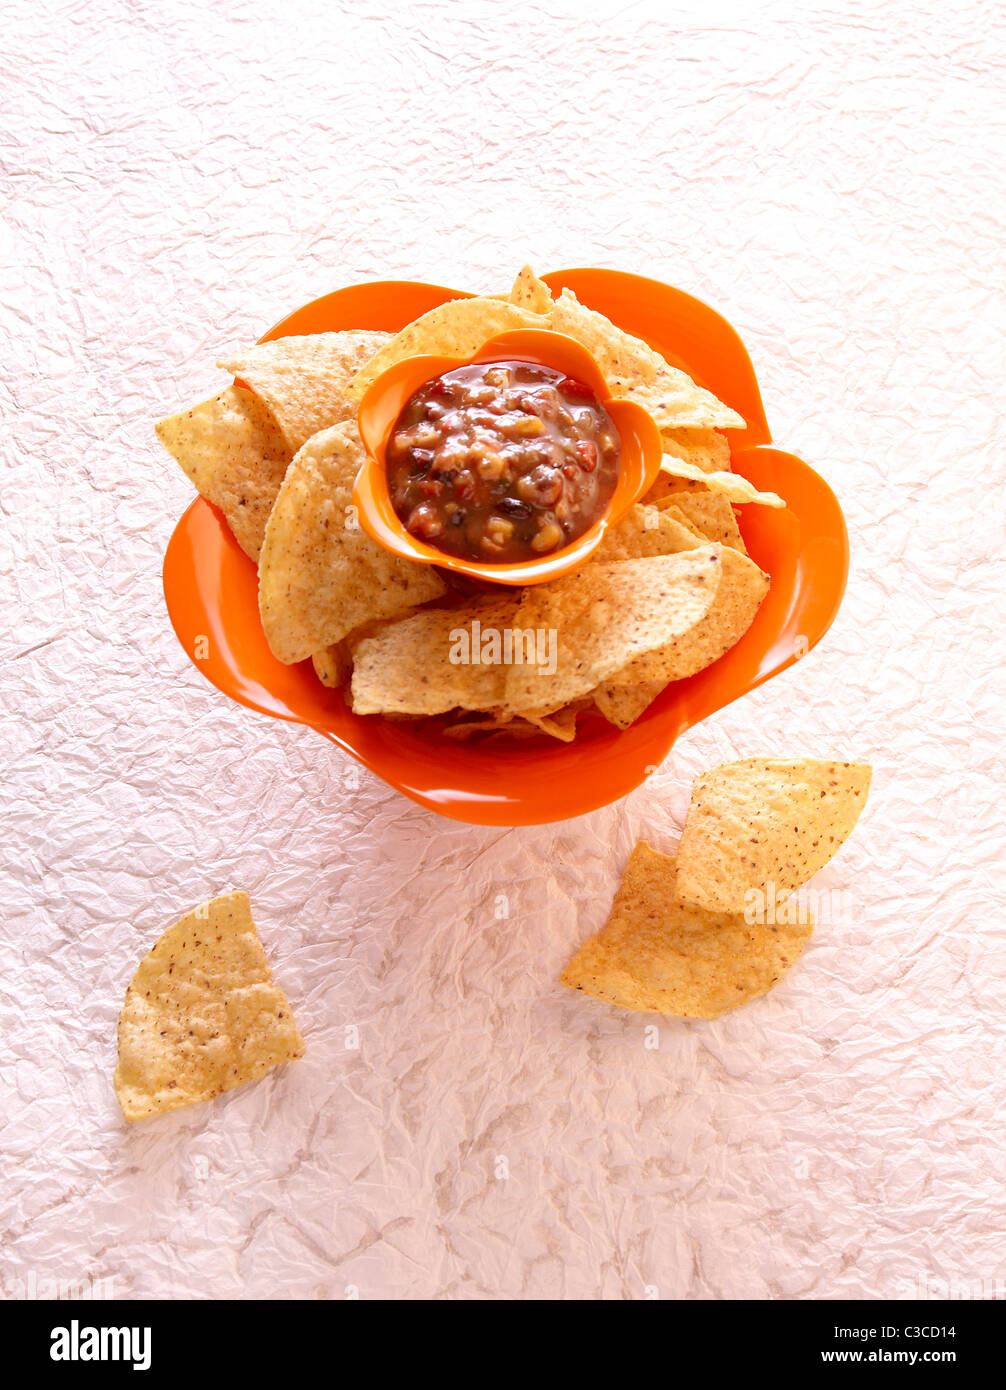 Chips and salsa Stock Photo